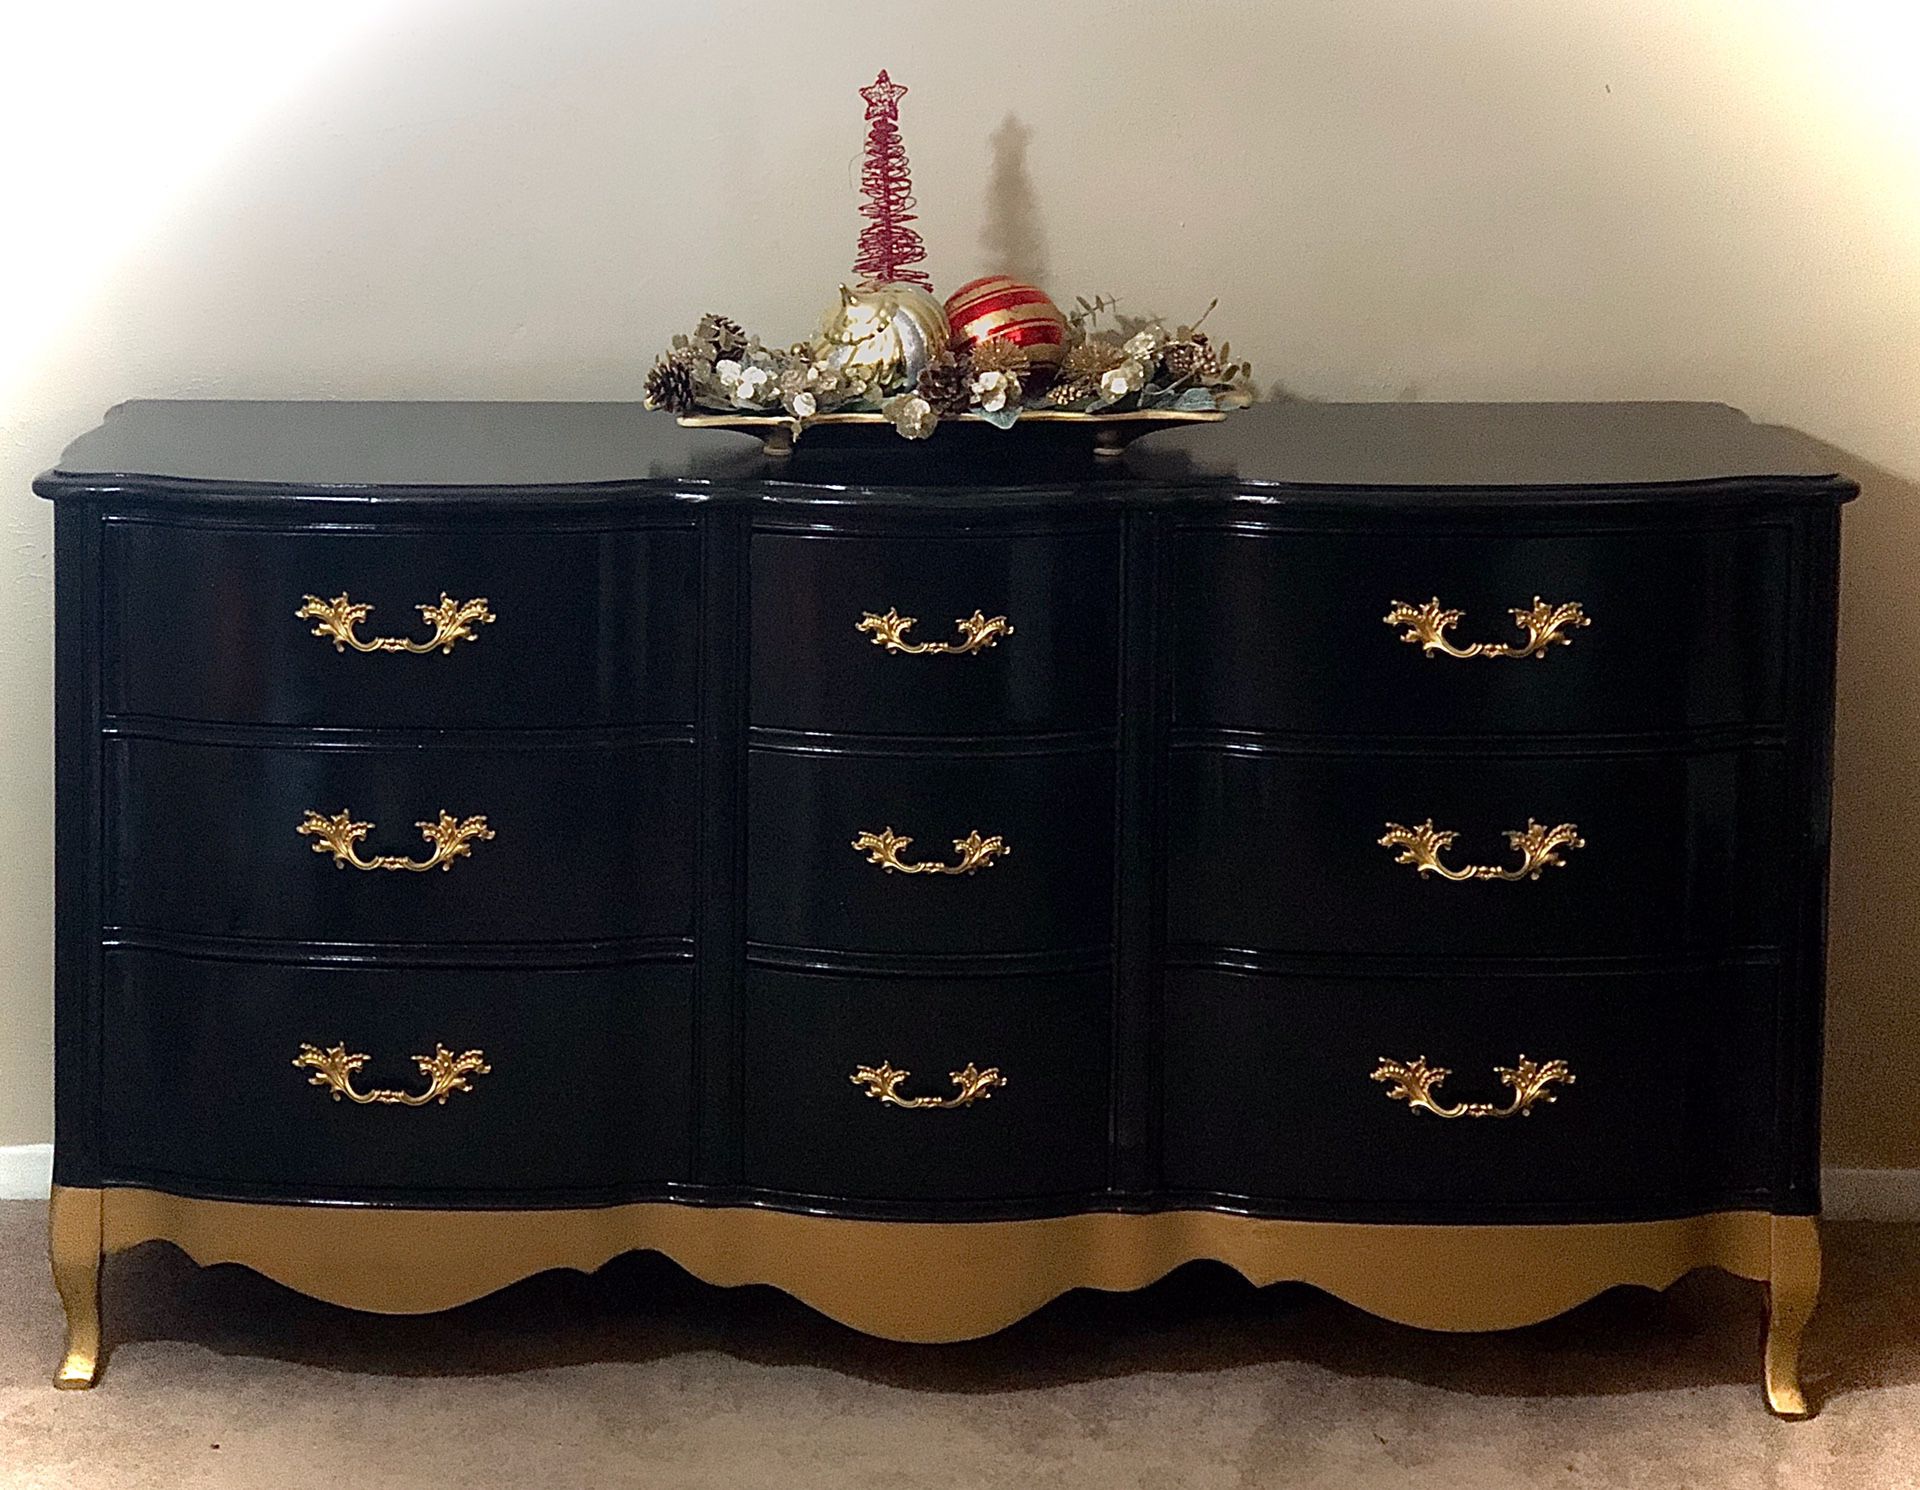 Refinished French provincial dresser